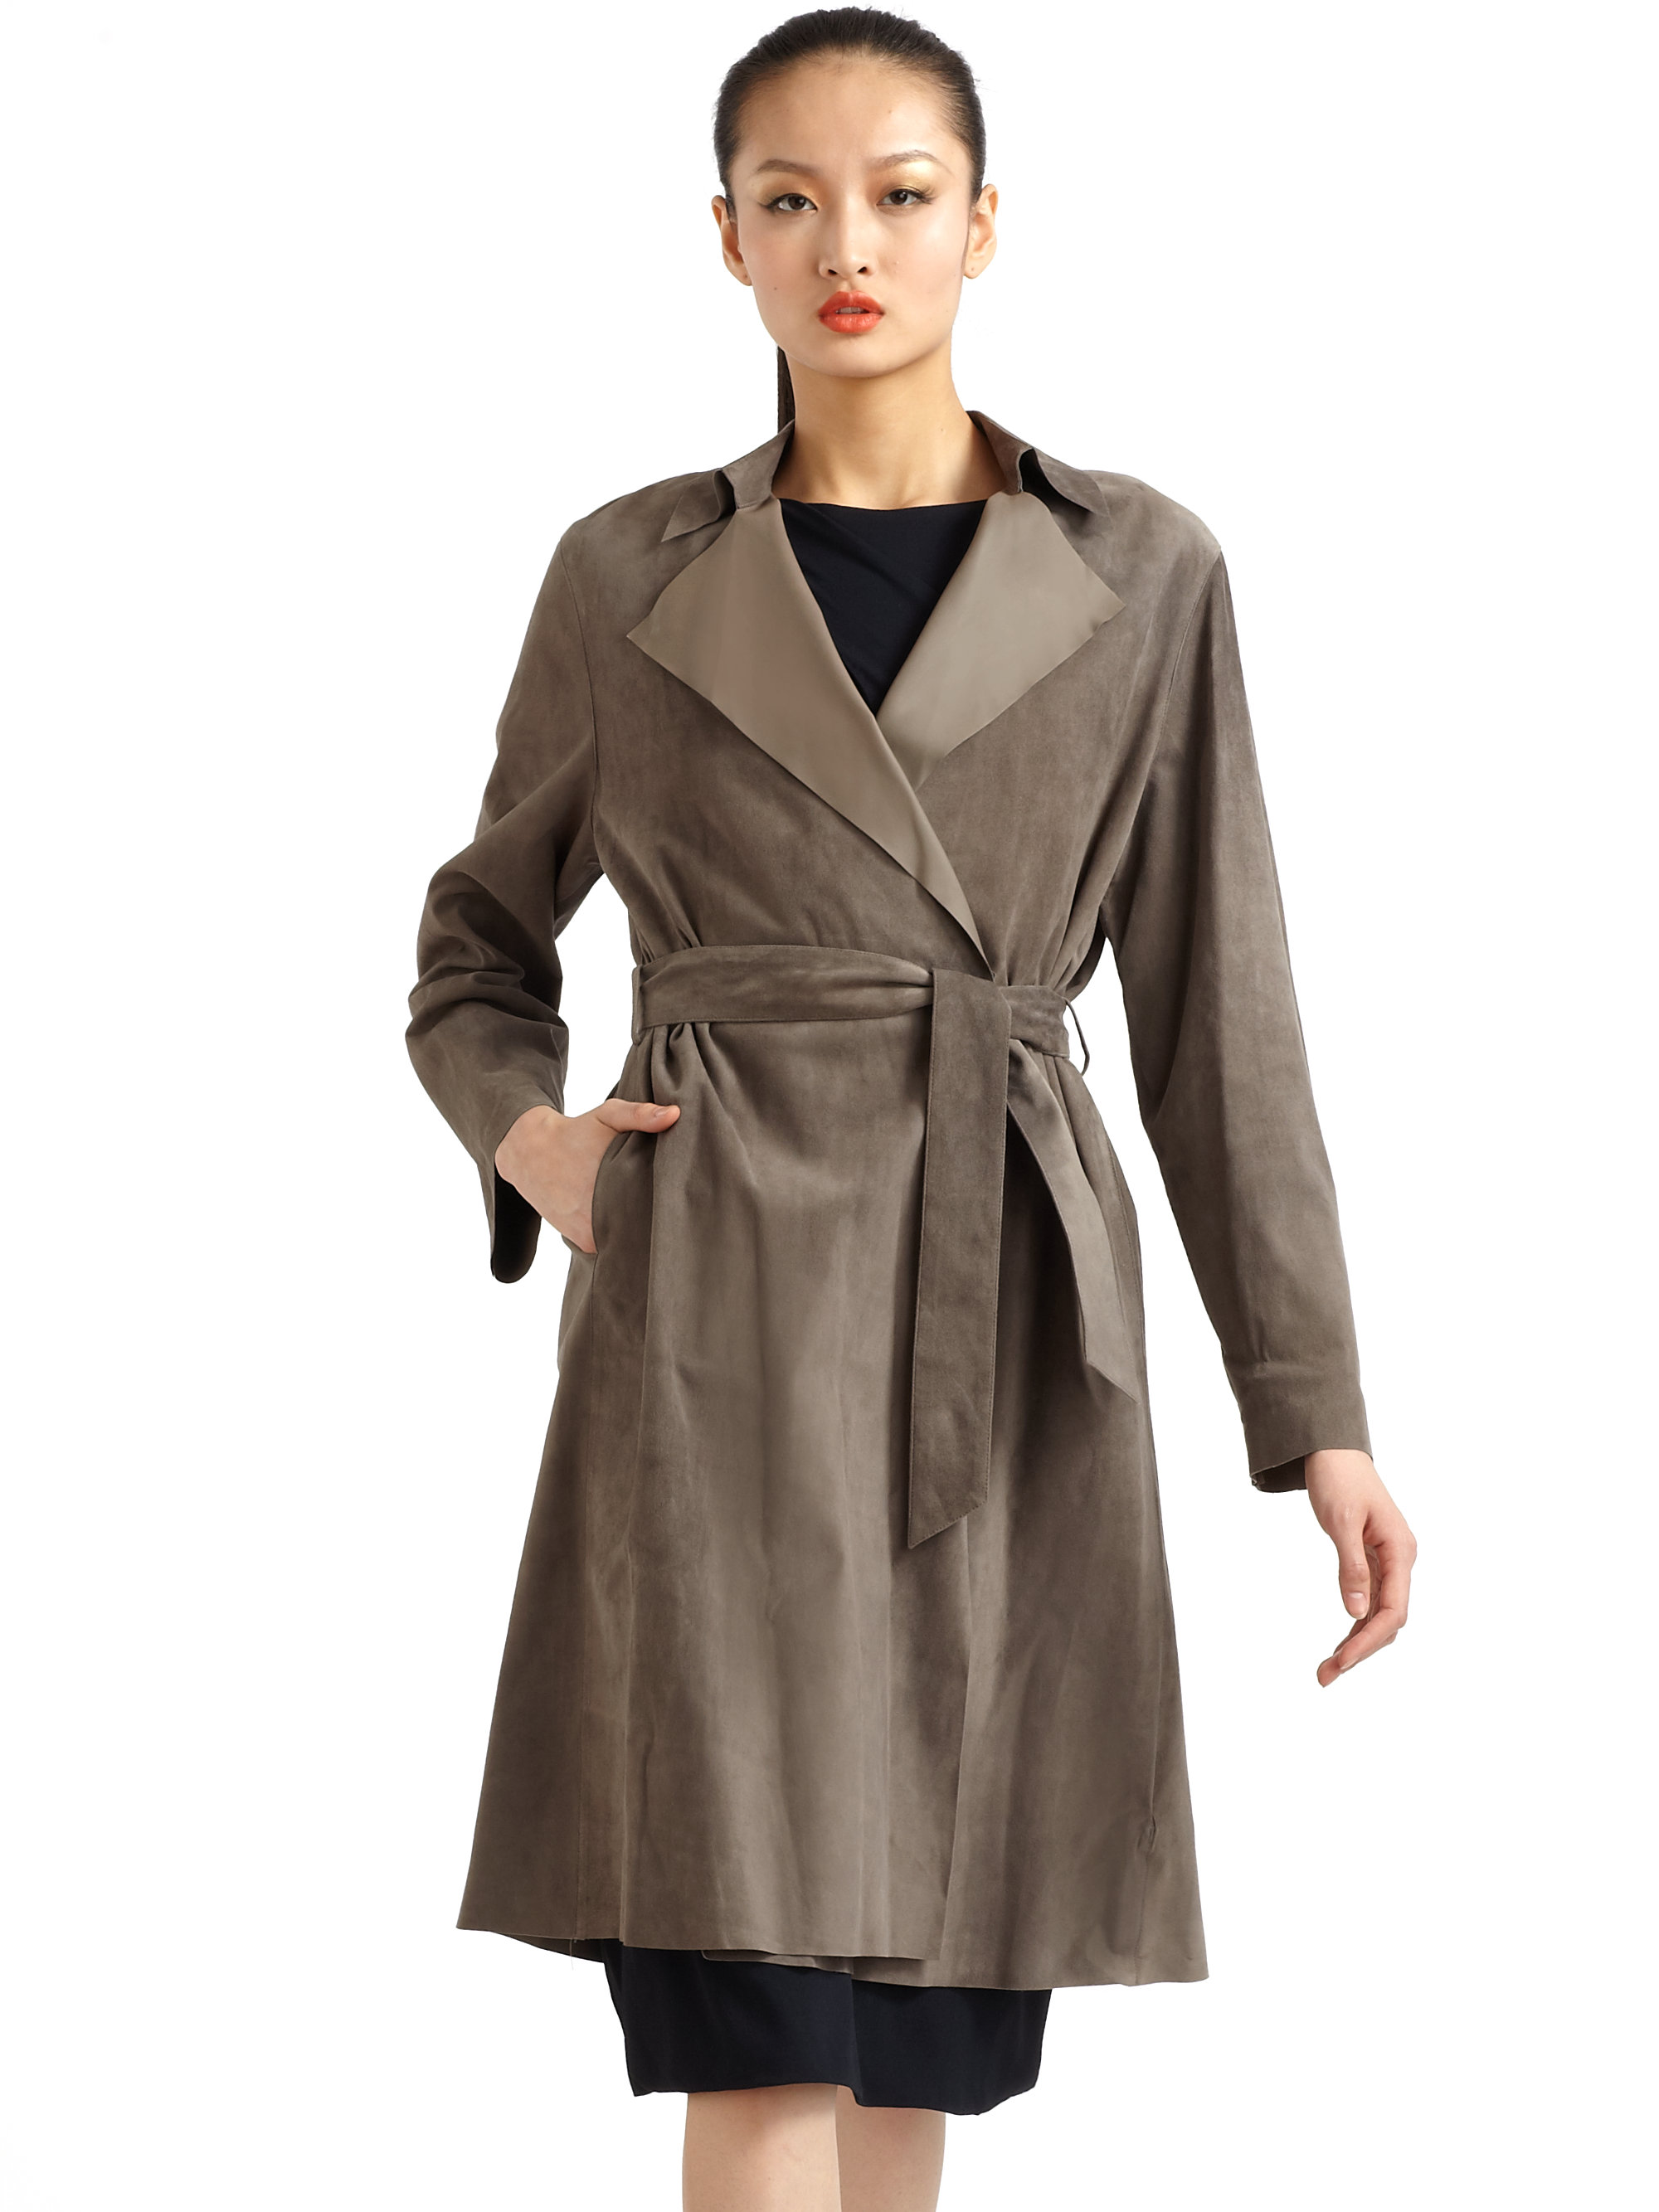 Lyst - Giorgio Armani Lightweight Suede Trench Coat in Gray